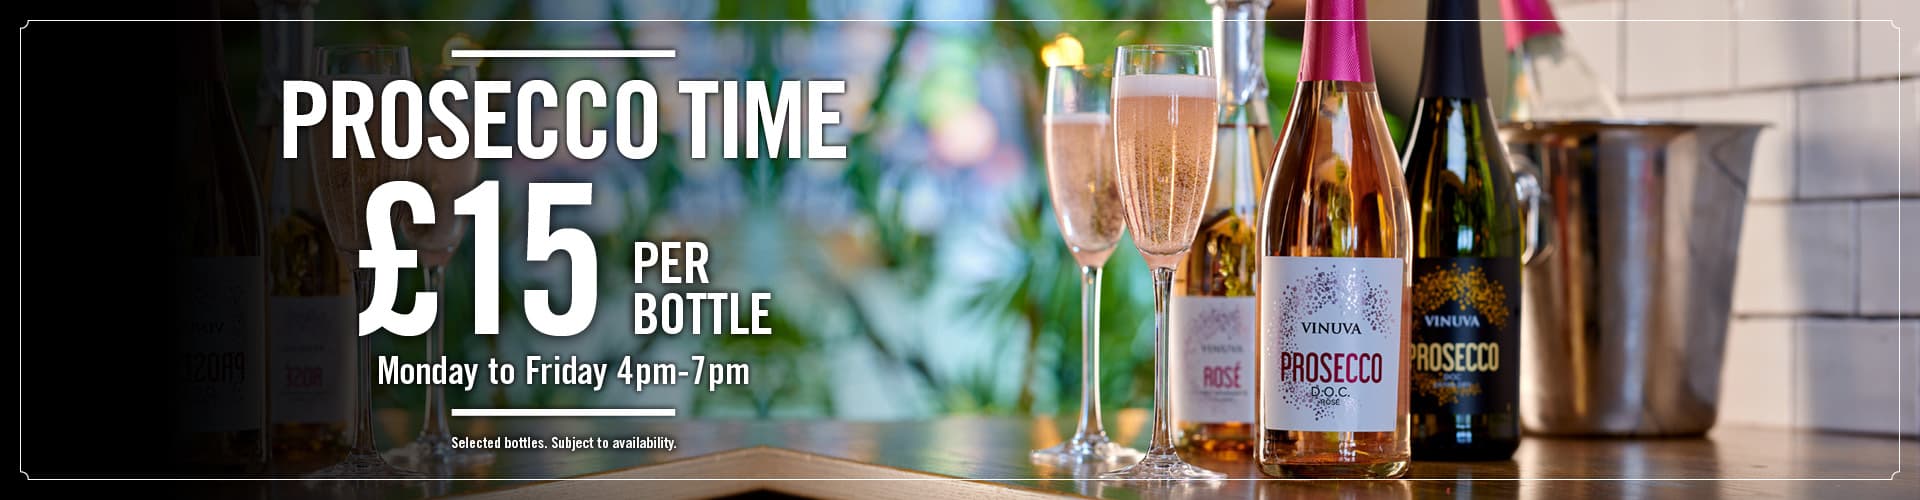 Prosecco Time means bottles for £15!